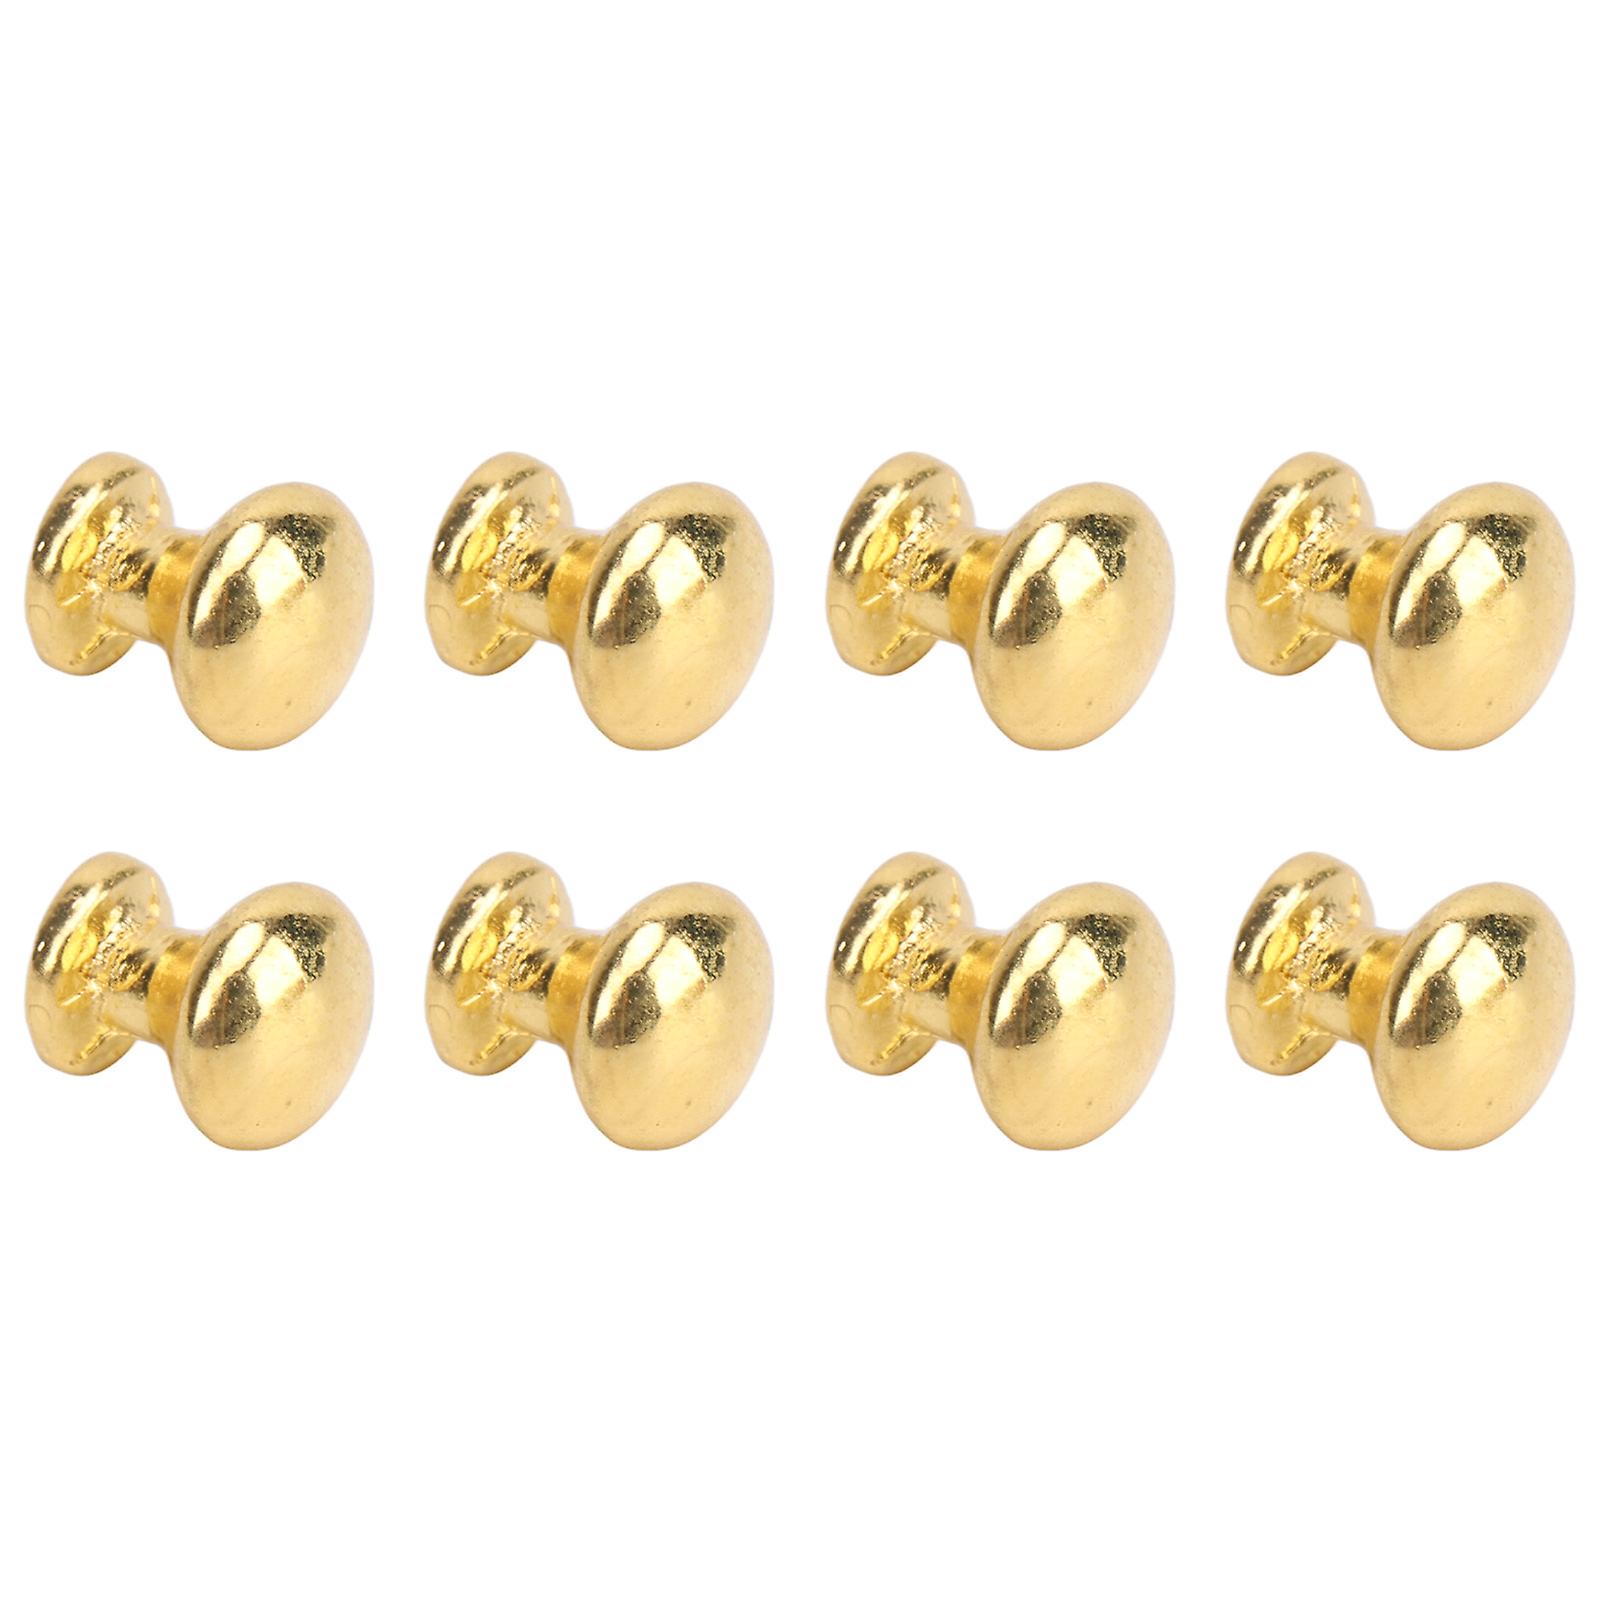 8pcs 1:12 Scale Miniature Round Head Pull Handle Metal Simple Style Dollhouse Door Handle Knobs Gold